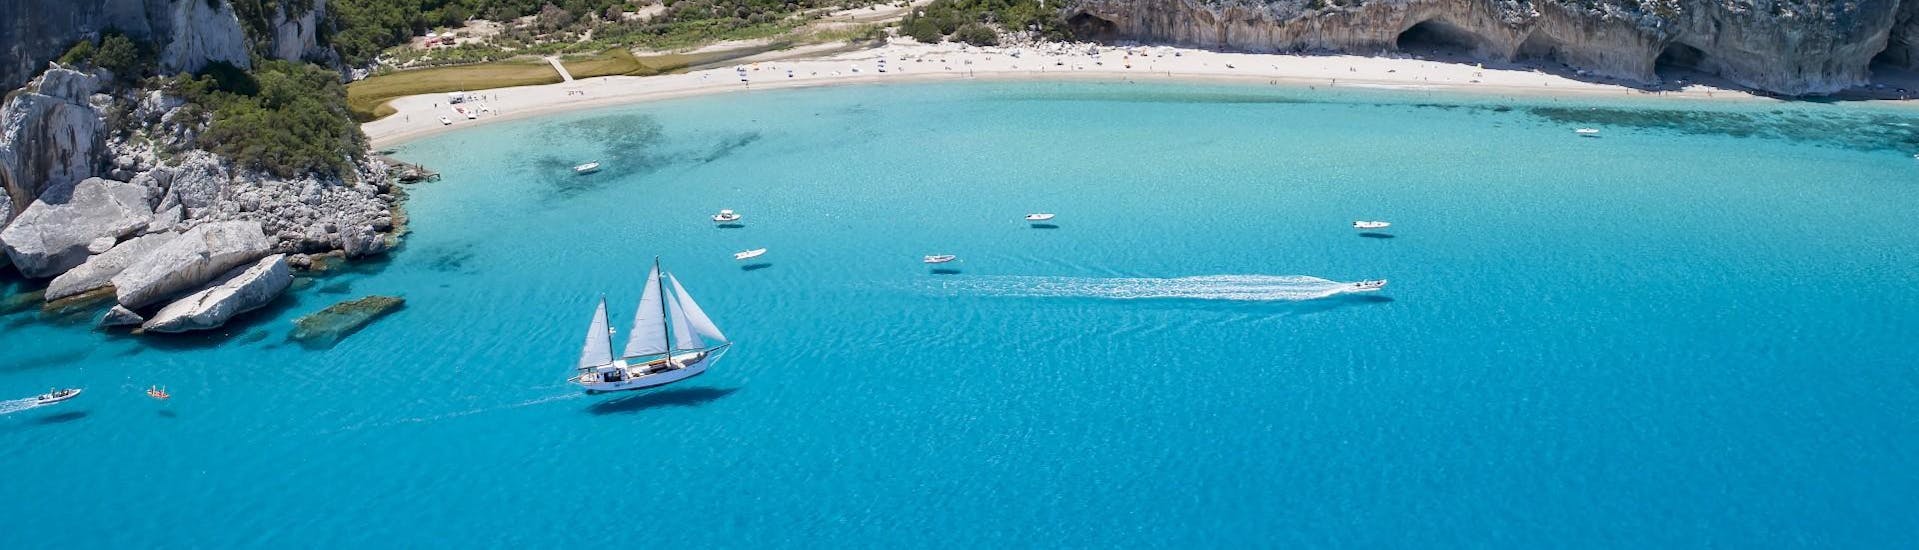 The beautiful beach that you can admire during the vintage sailing ship trip in Gulf of Orosei in high season with Dovesesto Cala Gonone.